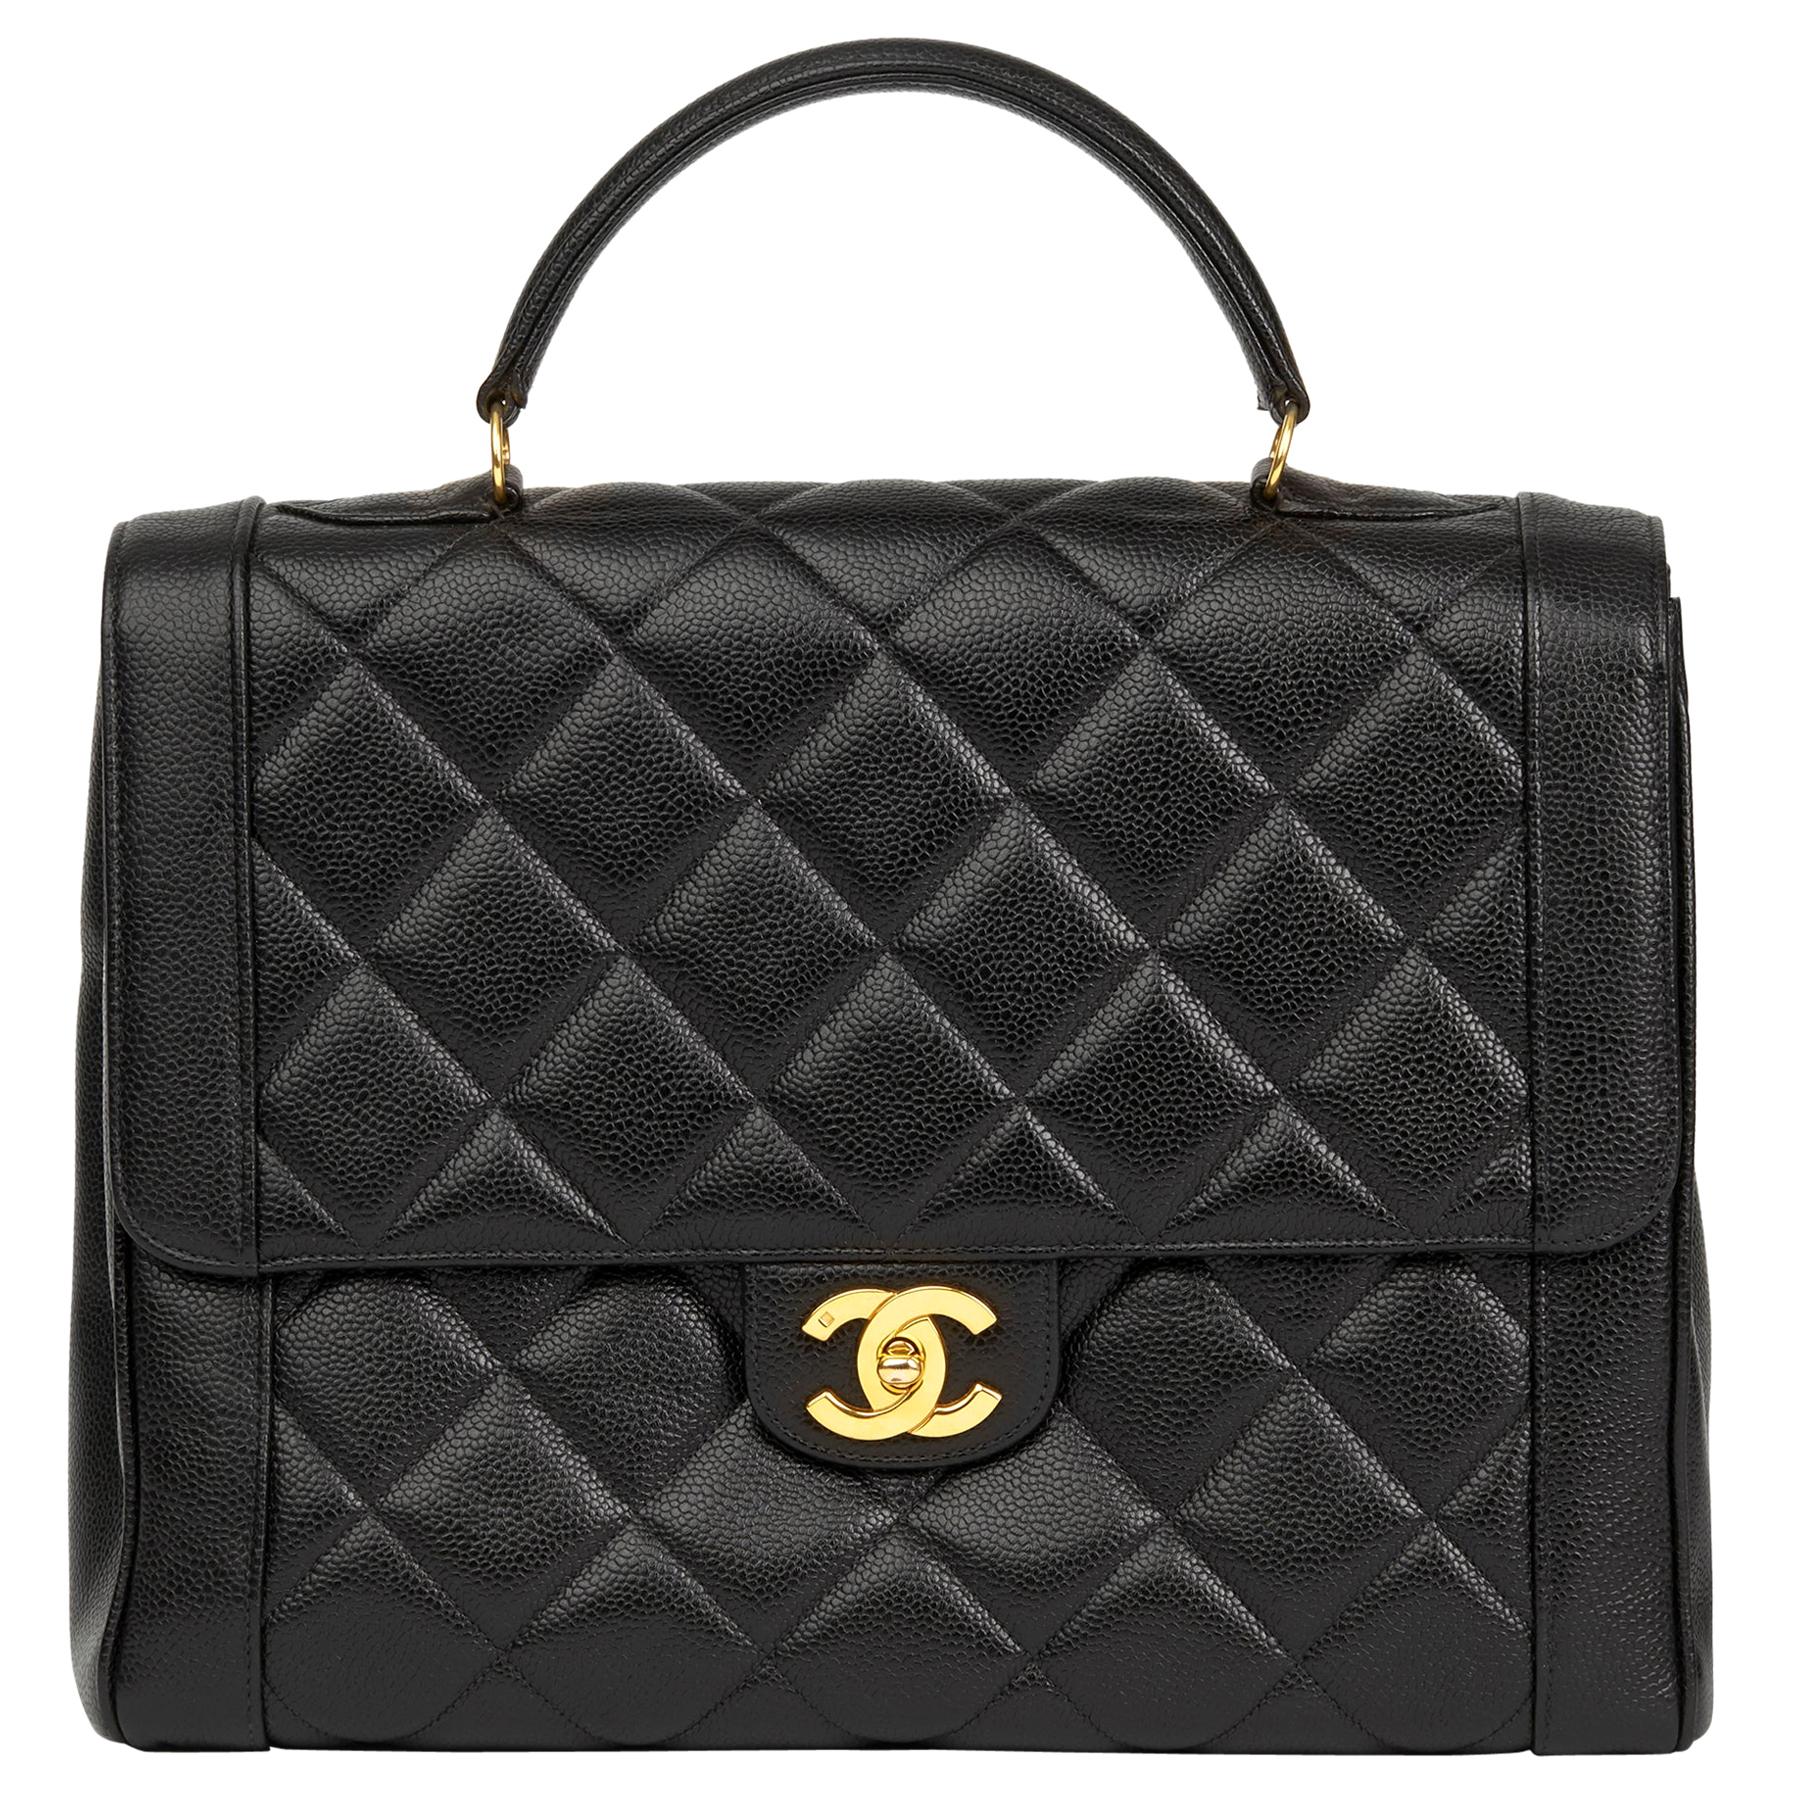 1993 Chanel Black Quilted Caviar Leather Vintage Classic Kelly